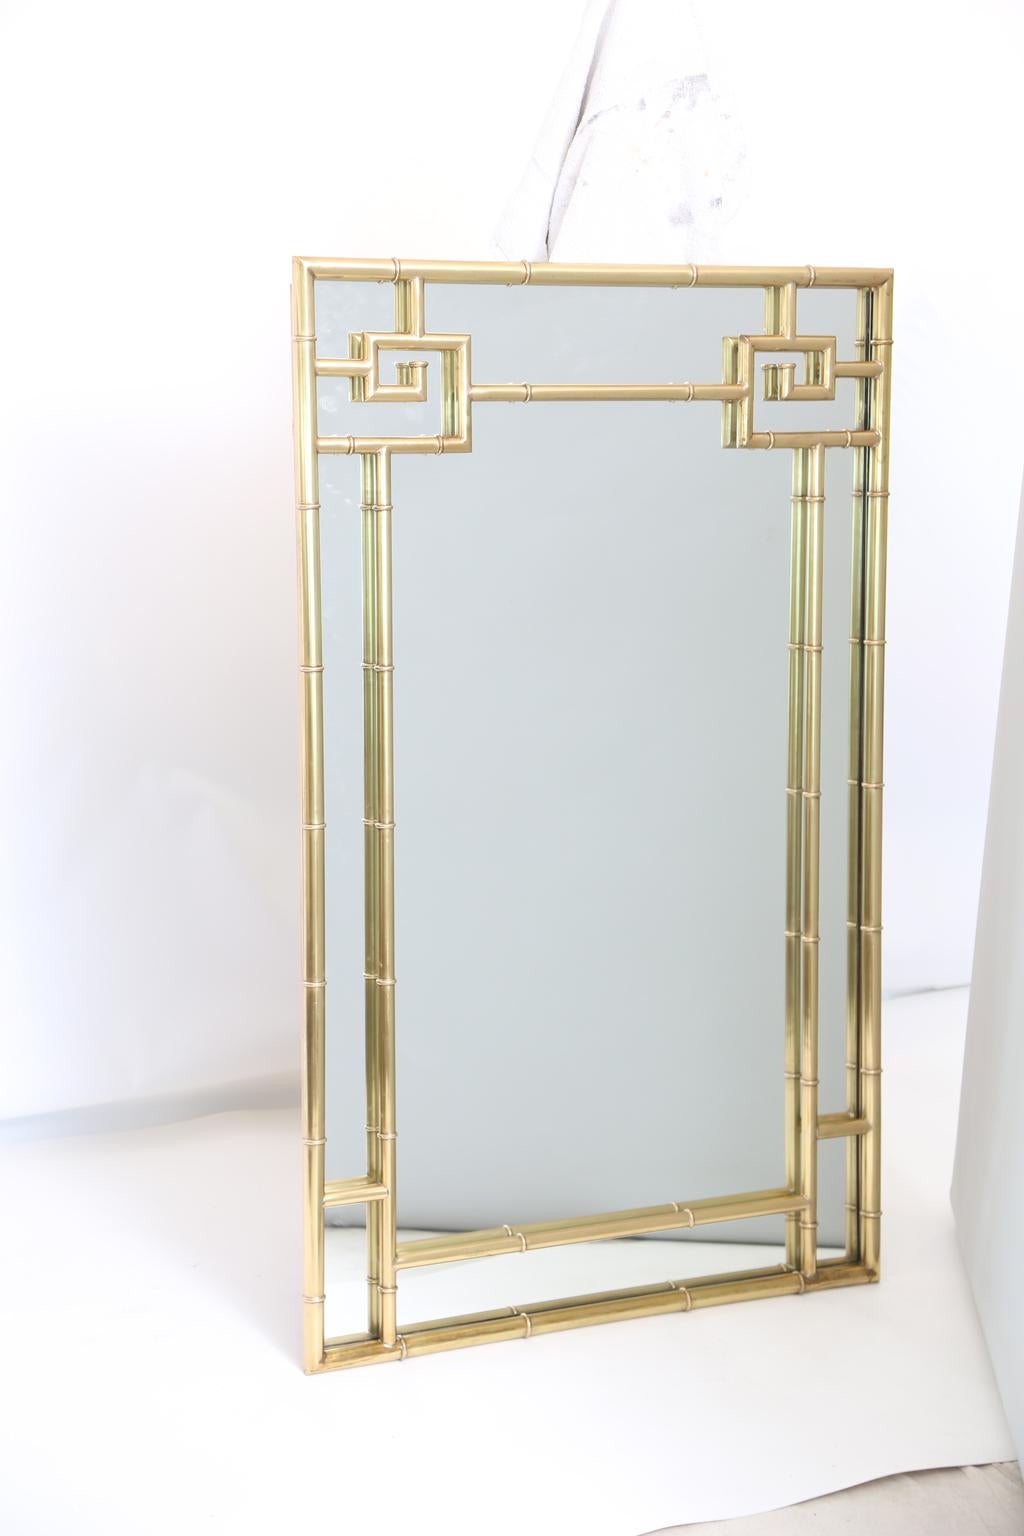 Mastercraft mirror, designed by Bernhard Rohne, of polished brass, its rectangular, faux bamboo frame with distinctive Greek key elements.

Stock ID: D2710.